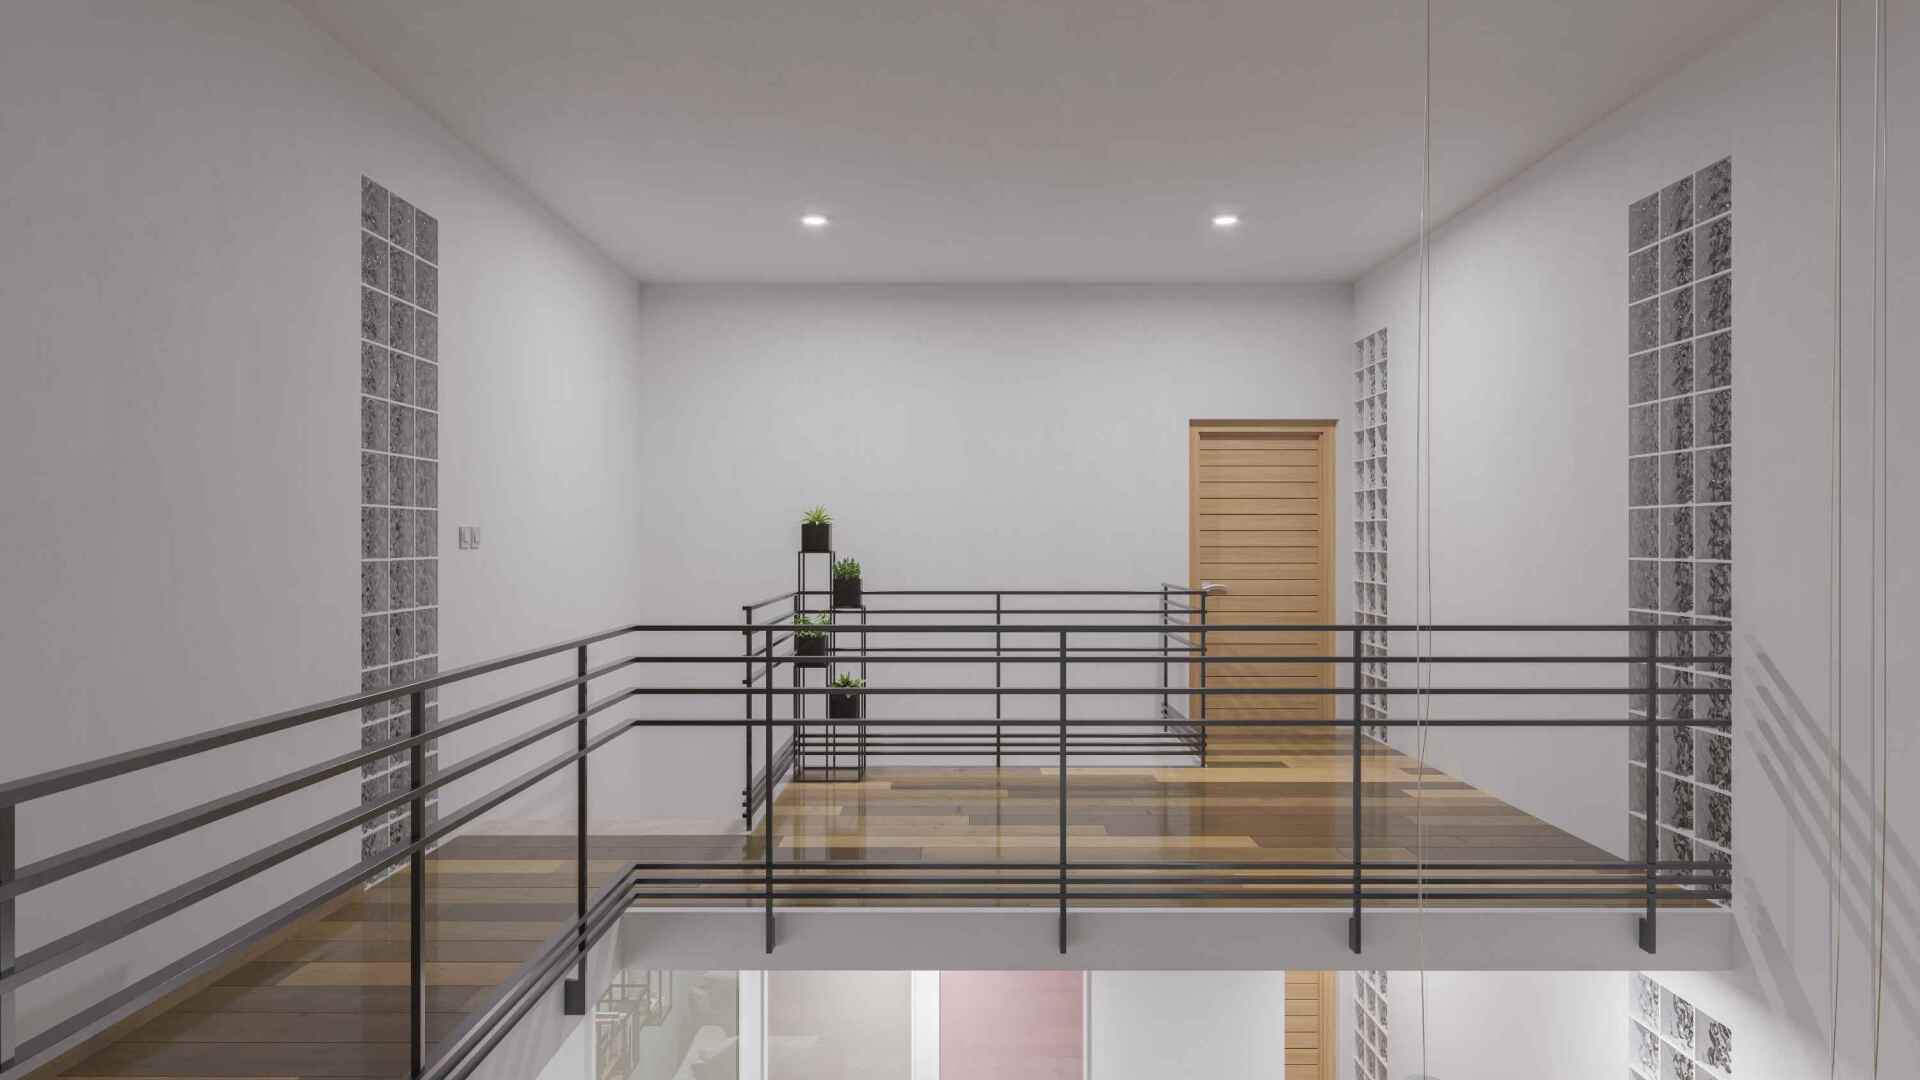 Mezzanine floor - delivered to your design for any building - inside a brick building.